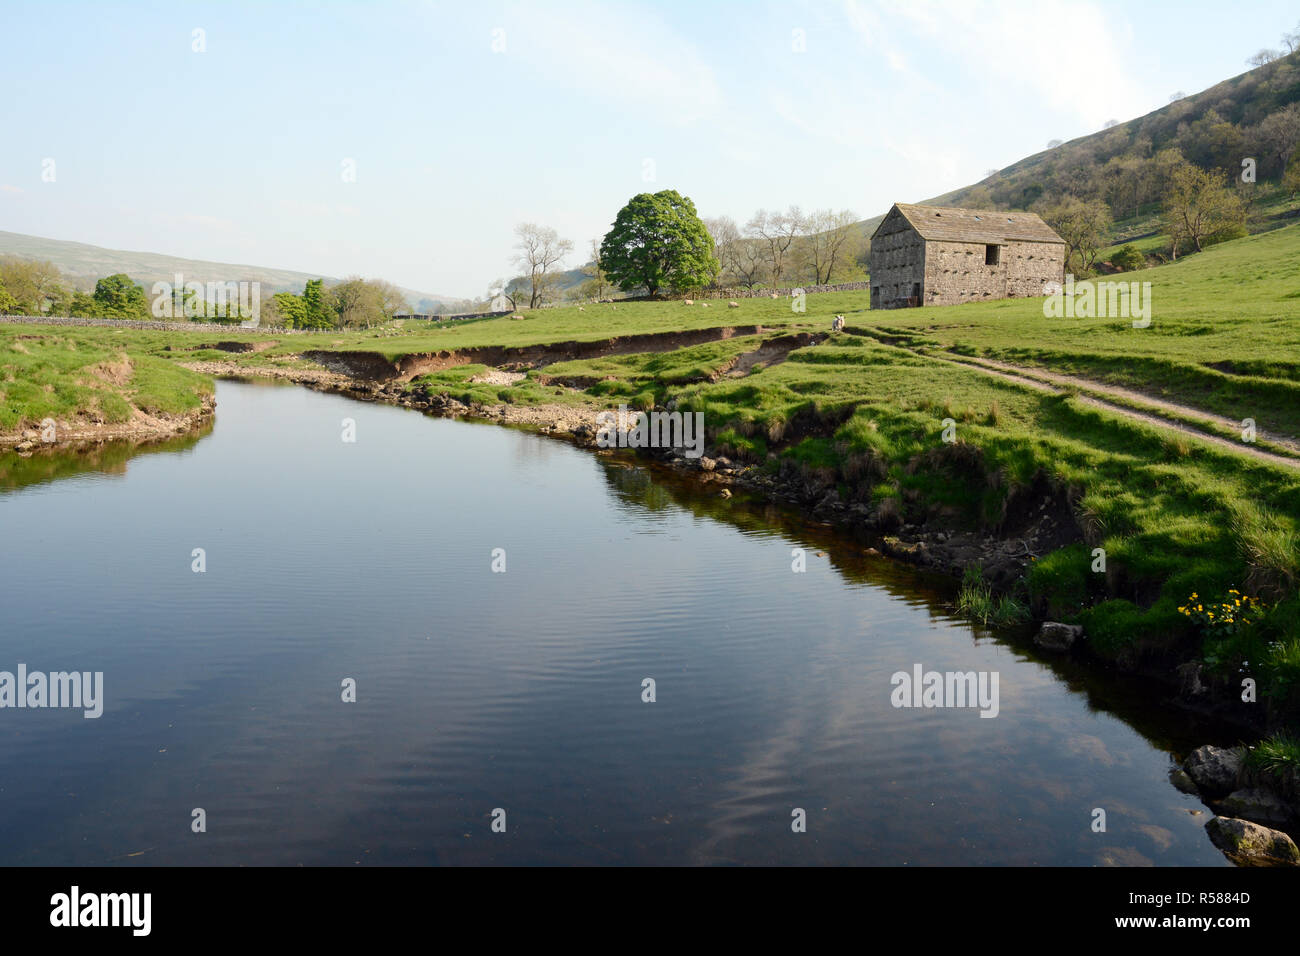 The scenic banks of the river Wharfe in the countryside on the Dales Way hiking trail, near Starbotton, Yorkshire, Northern England, Great Britain. Stock Photo